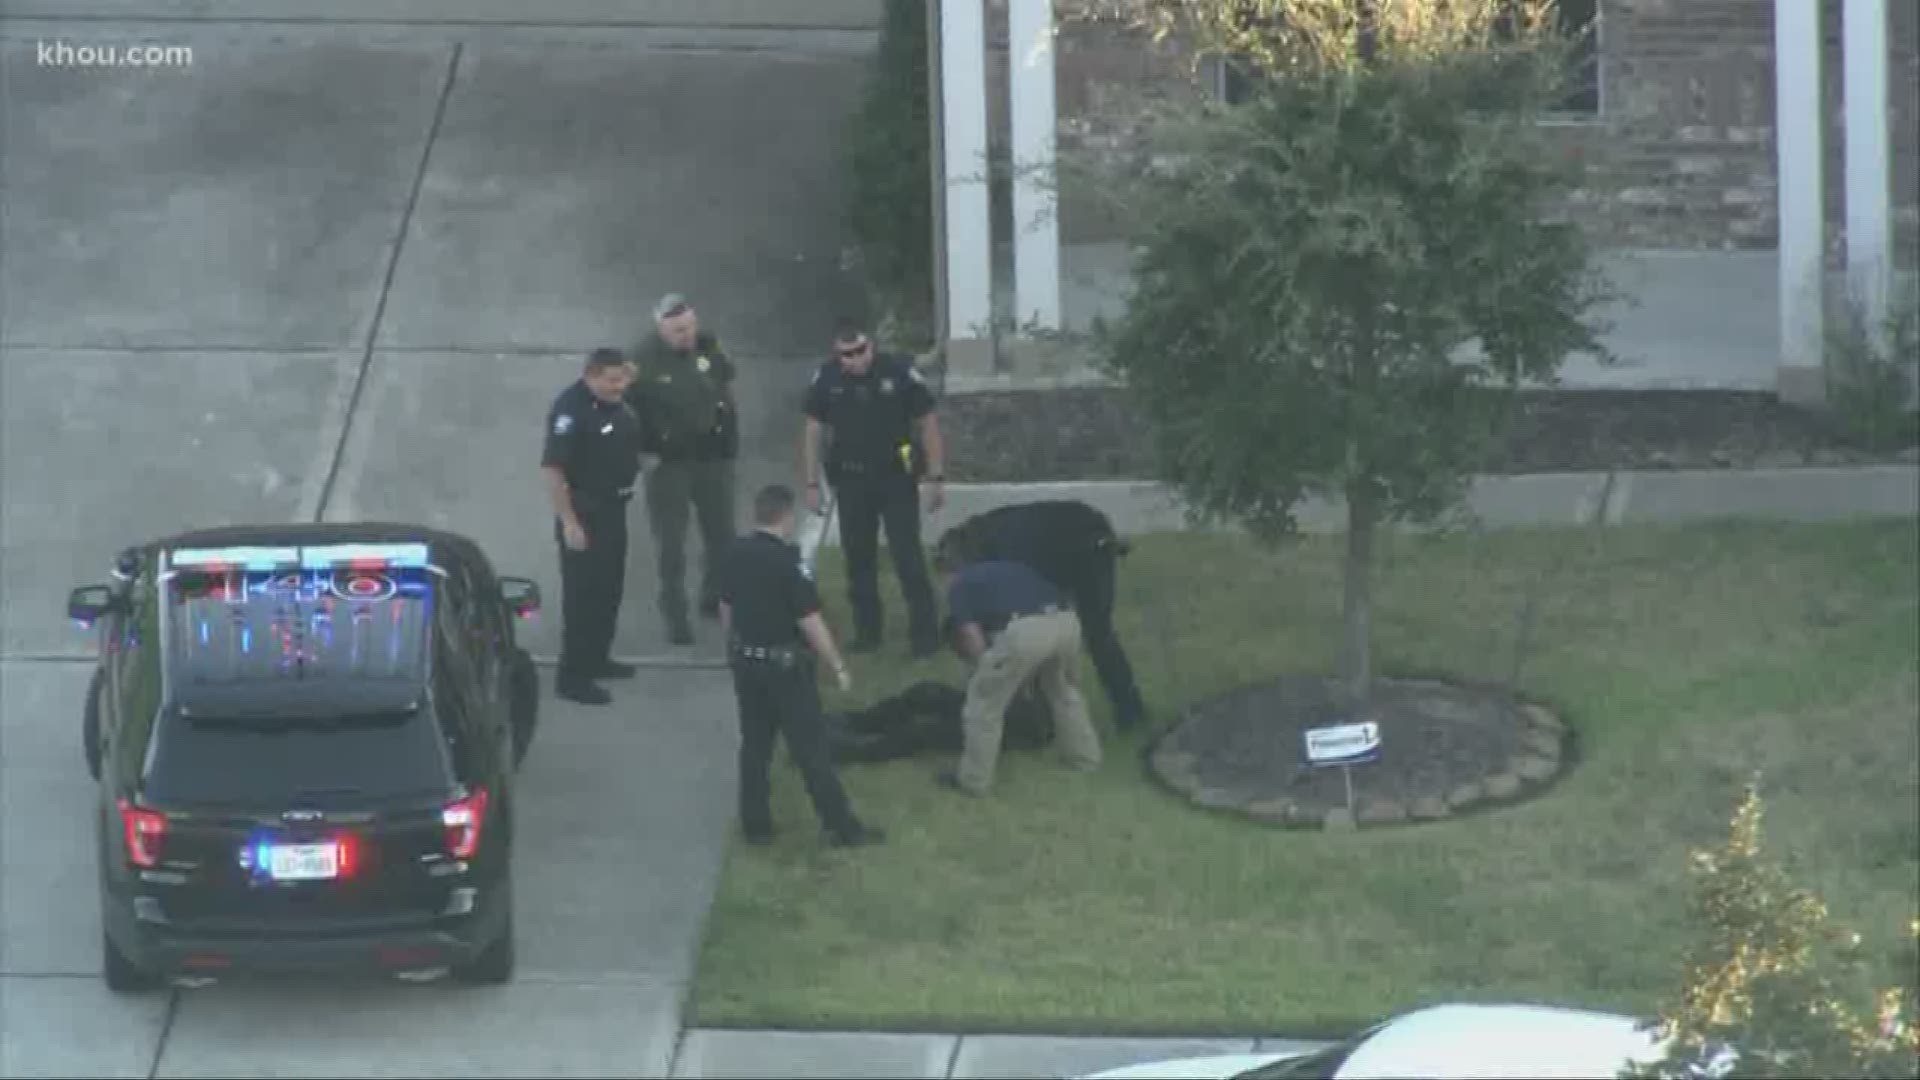 Officers arrested the man they say stole a car, then led them on a chase through the southern part of Houston. He then ditched the car and started running in the Pearland area.